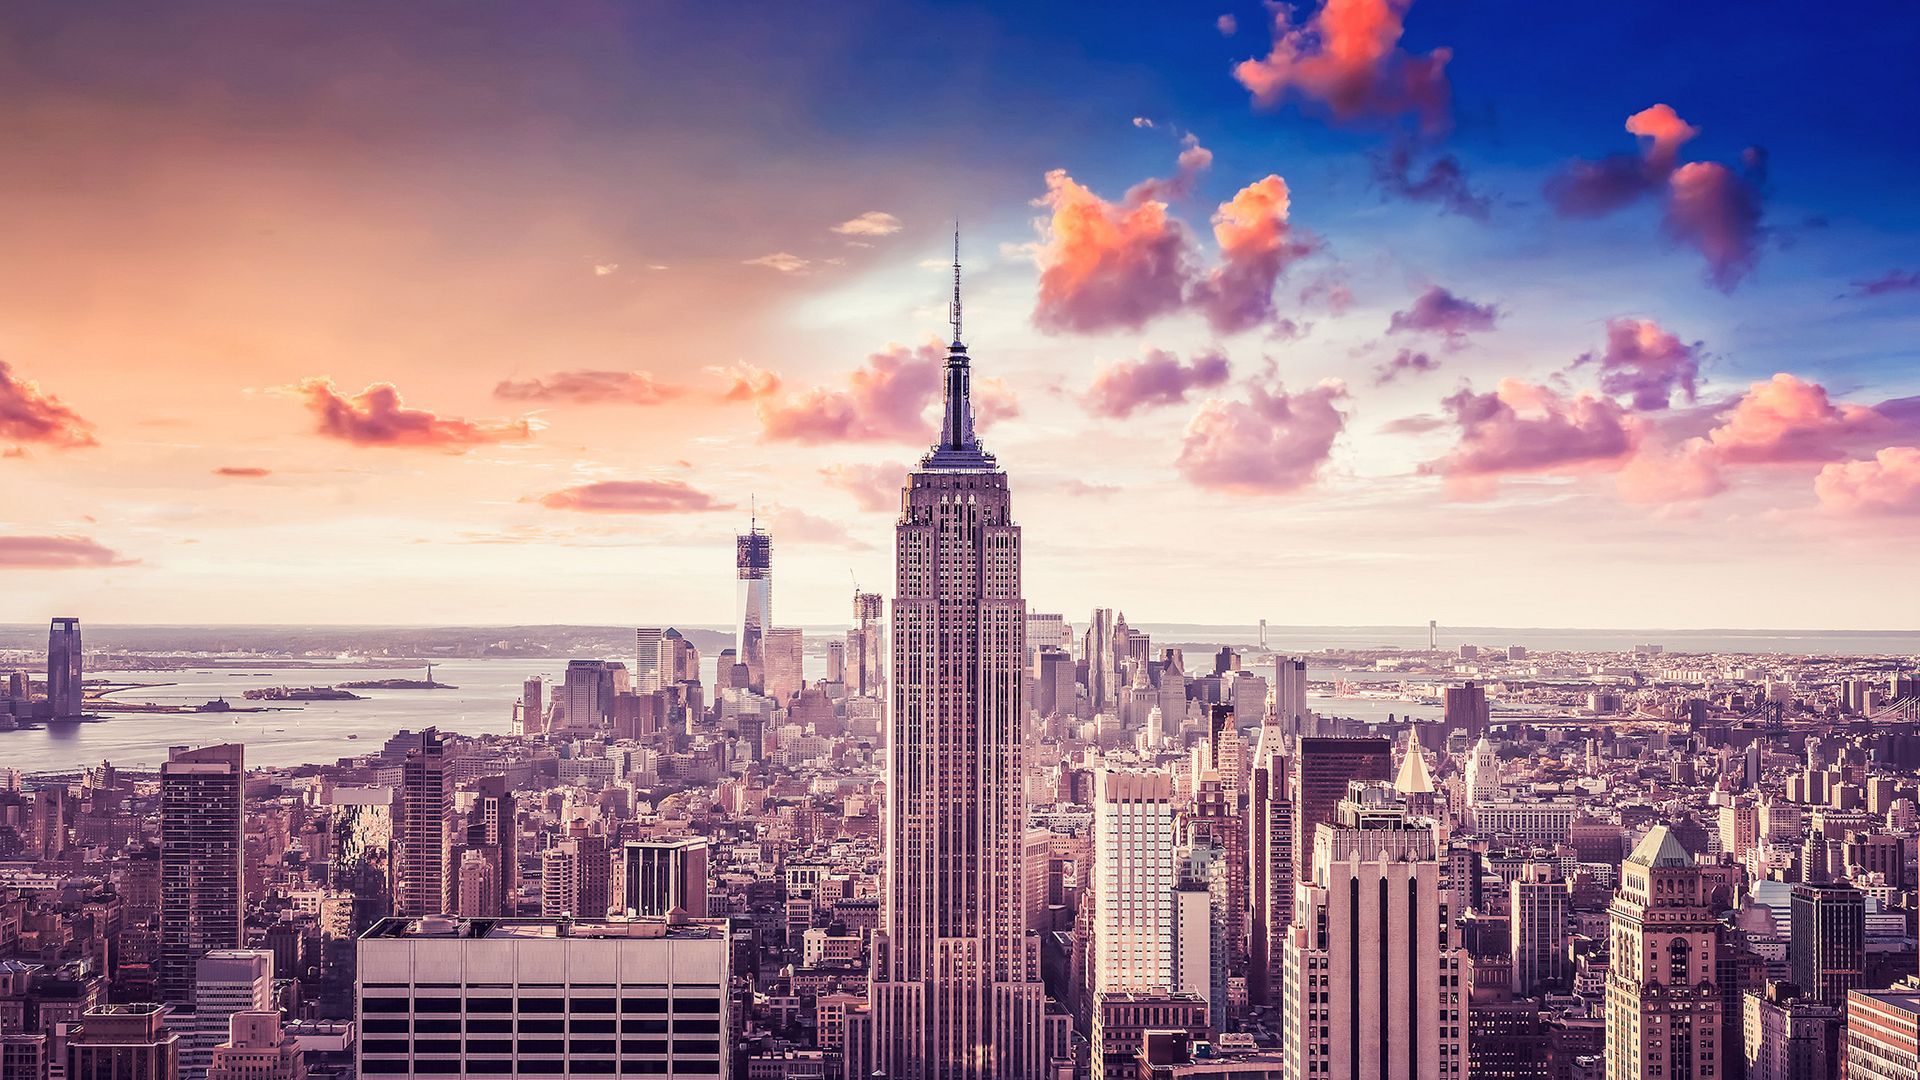 40 Hd New York City Wallpapers/Backgrounds For Free Download